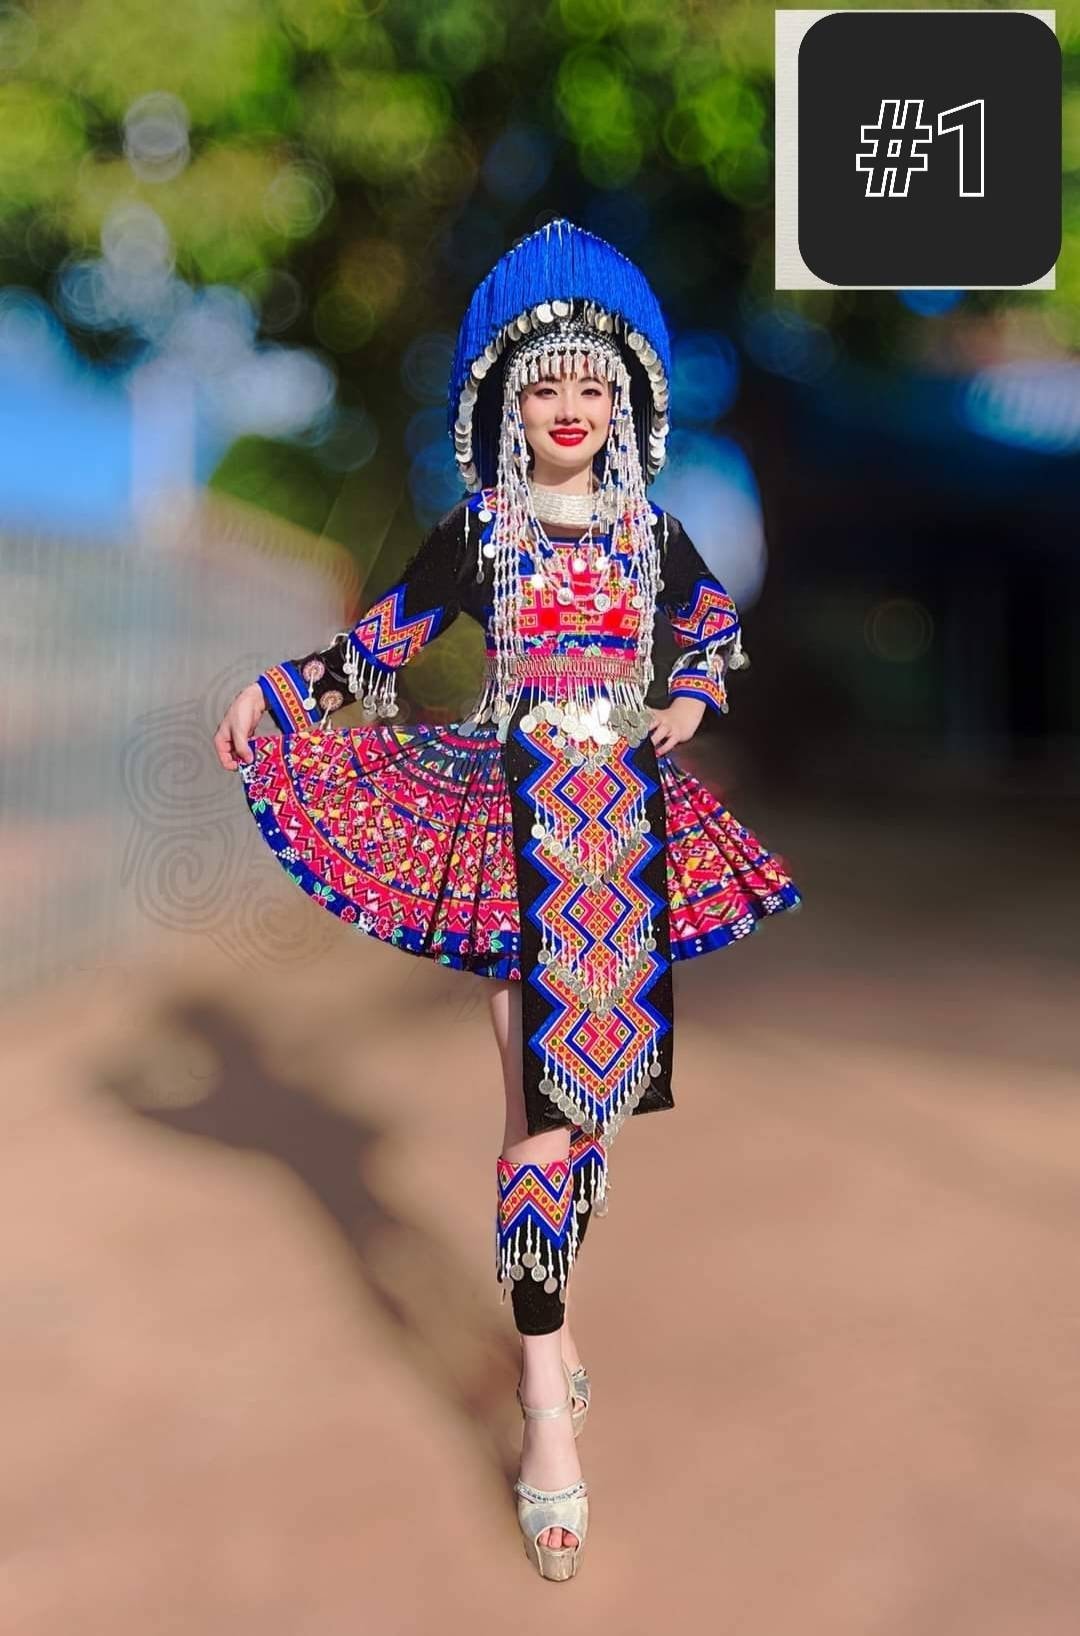 Stunning Authentic Hmong Dress Set of Hmong Outfit for Women